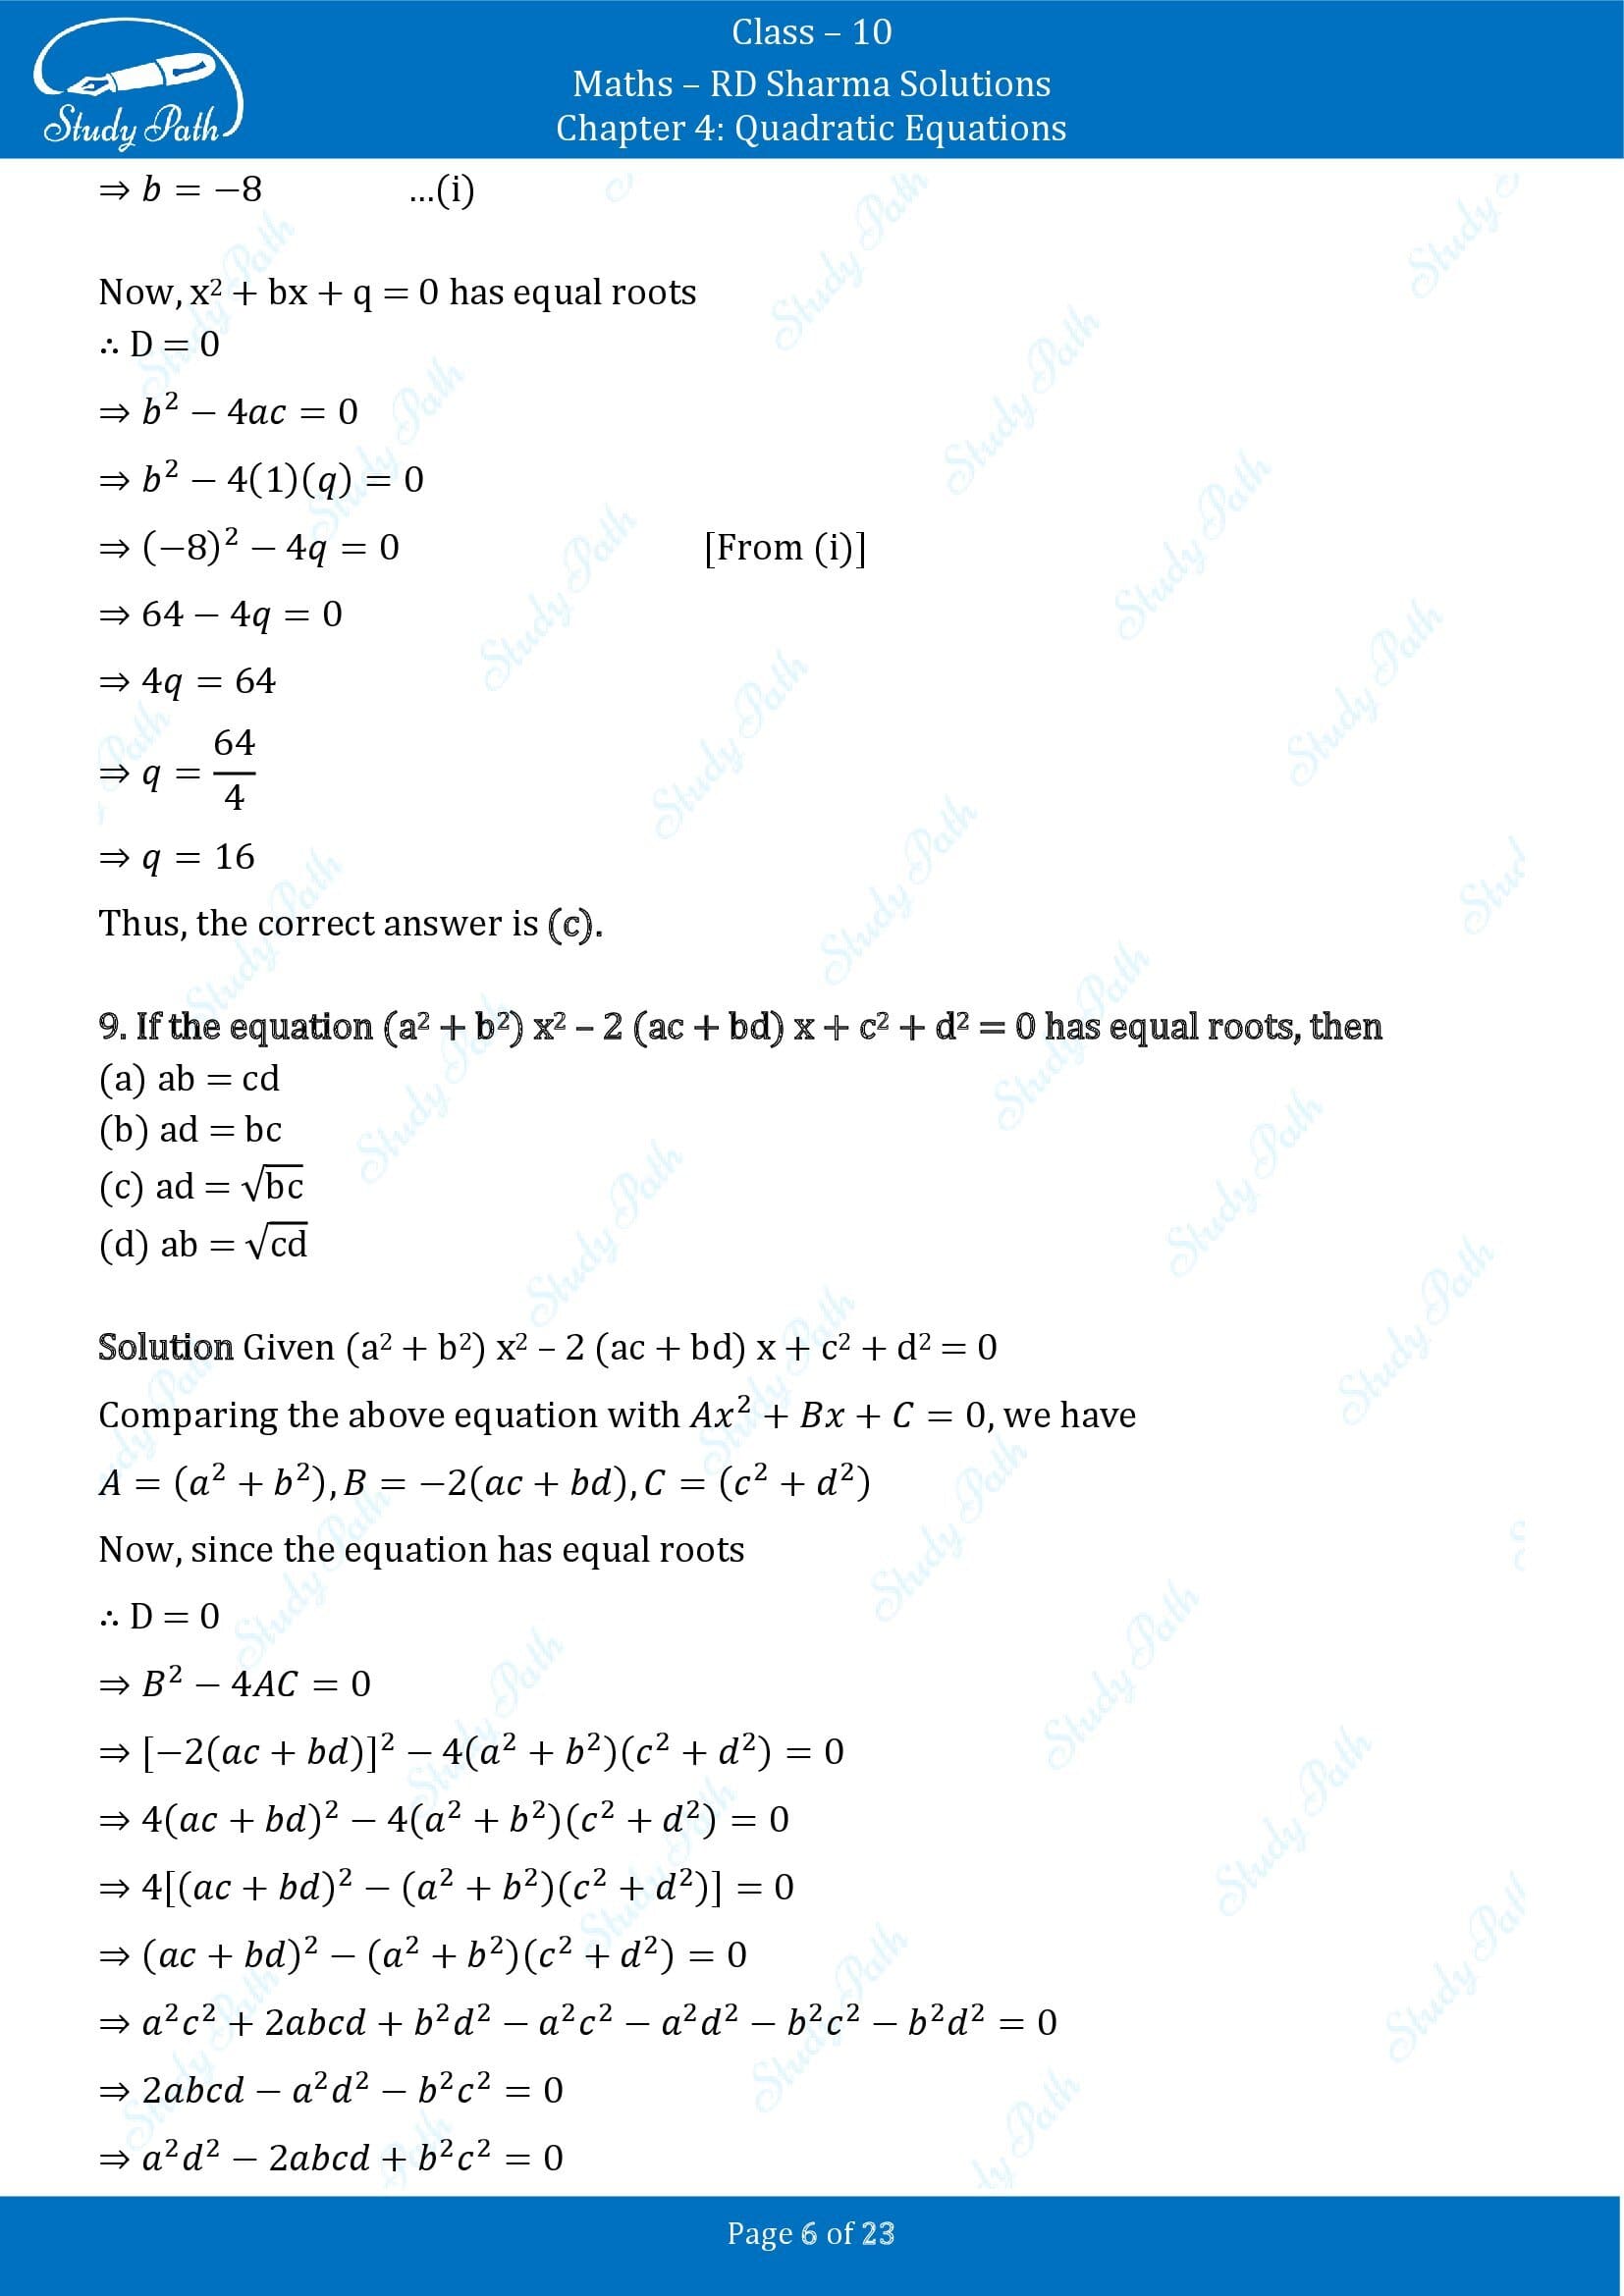 RD Sharma Solutions Class 10 Chapter 4 Quadratic Equations Multiple Choice Questions MCQs 00006